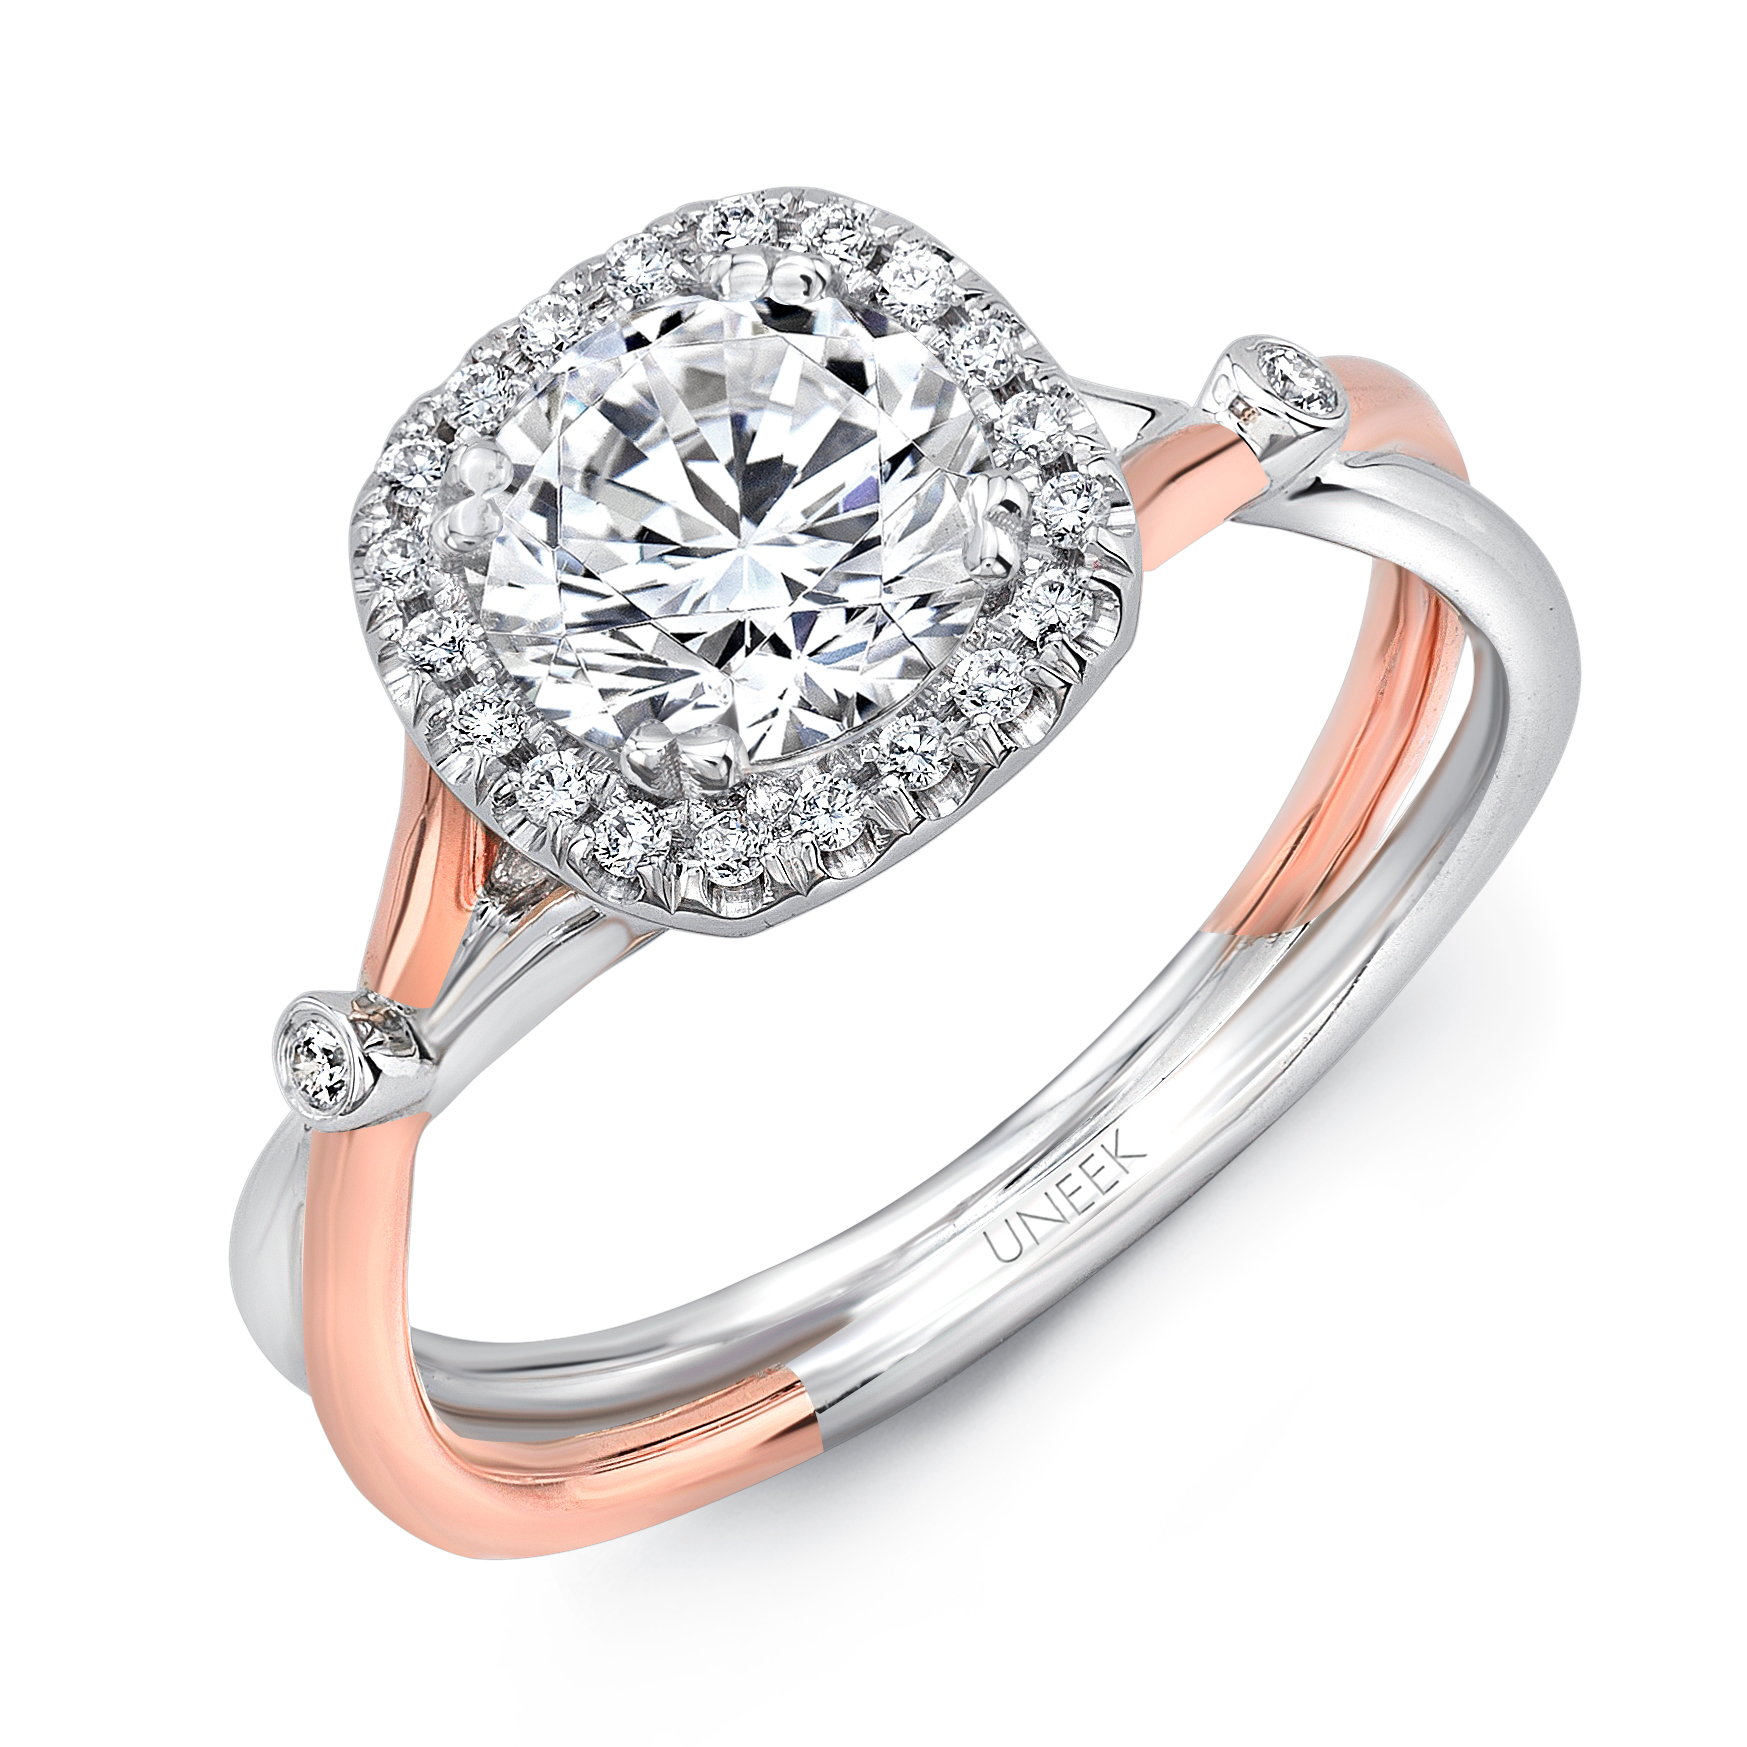 Platinum and yellow gold are the most popular choices for engagement rings.